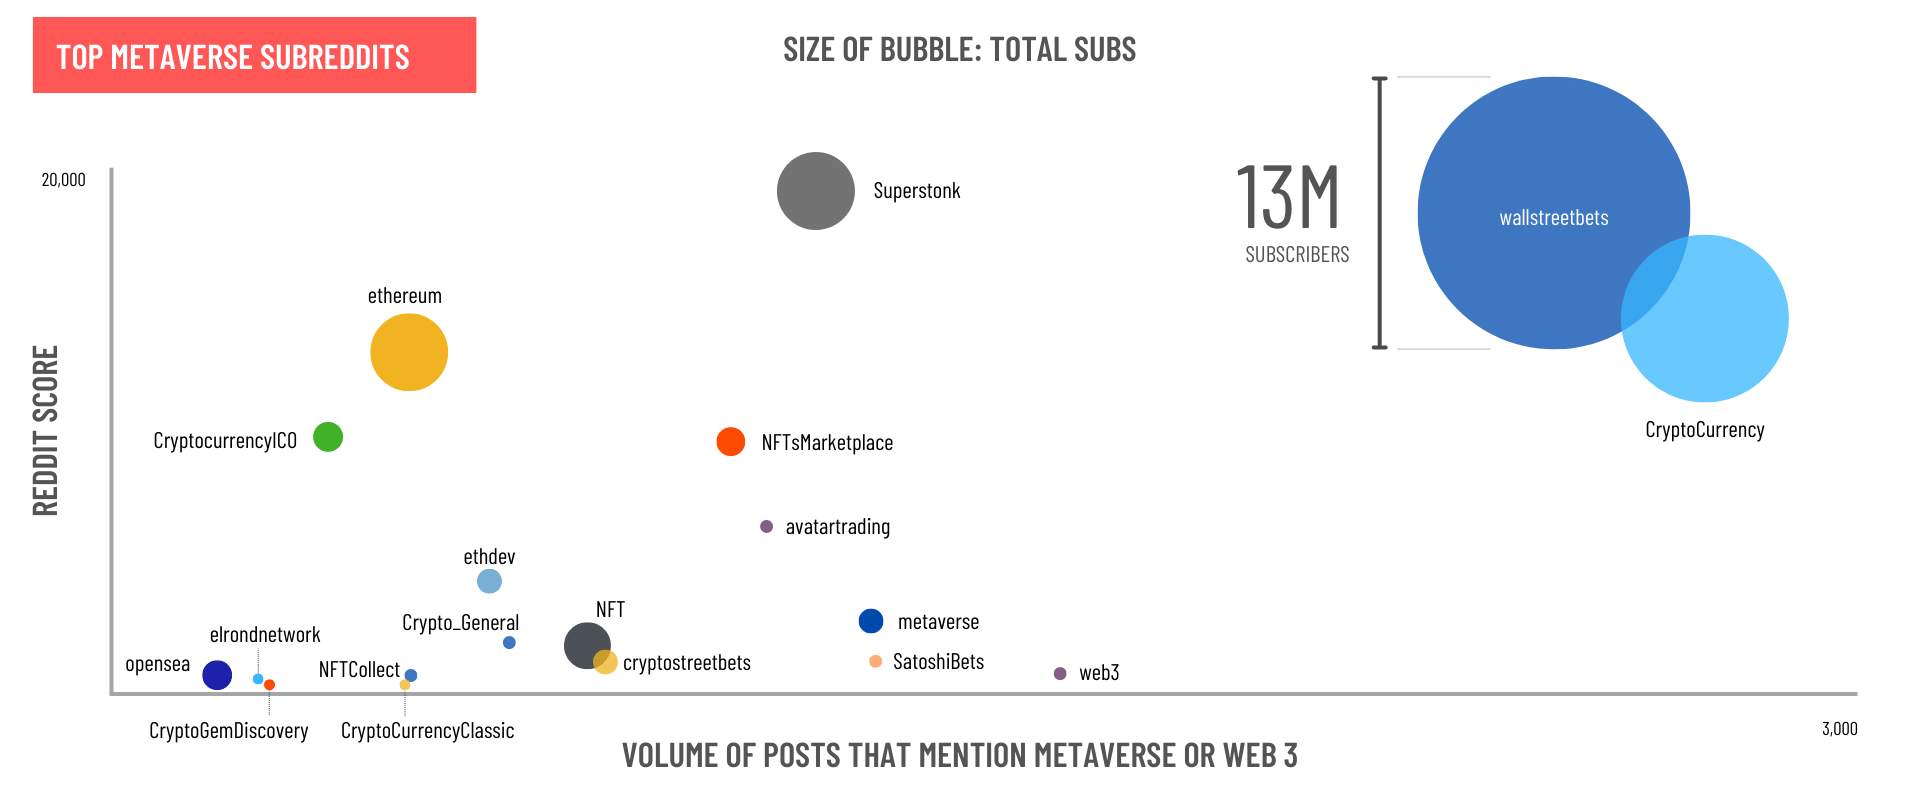 The top Metaverse Subreddits based on volume of discussion